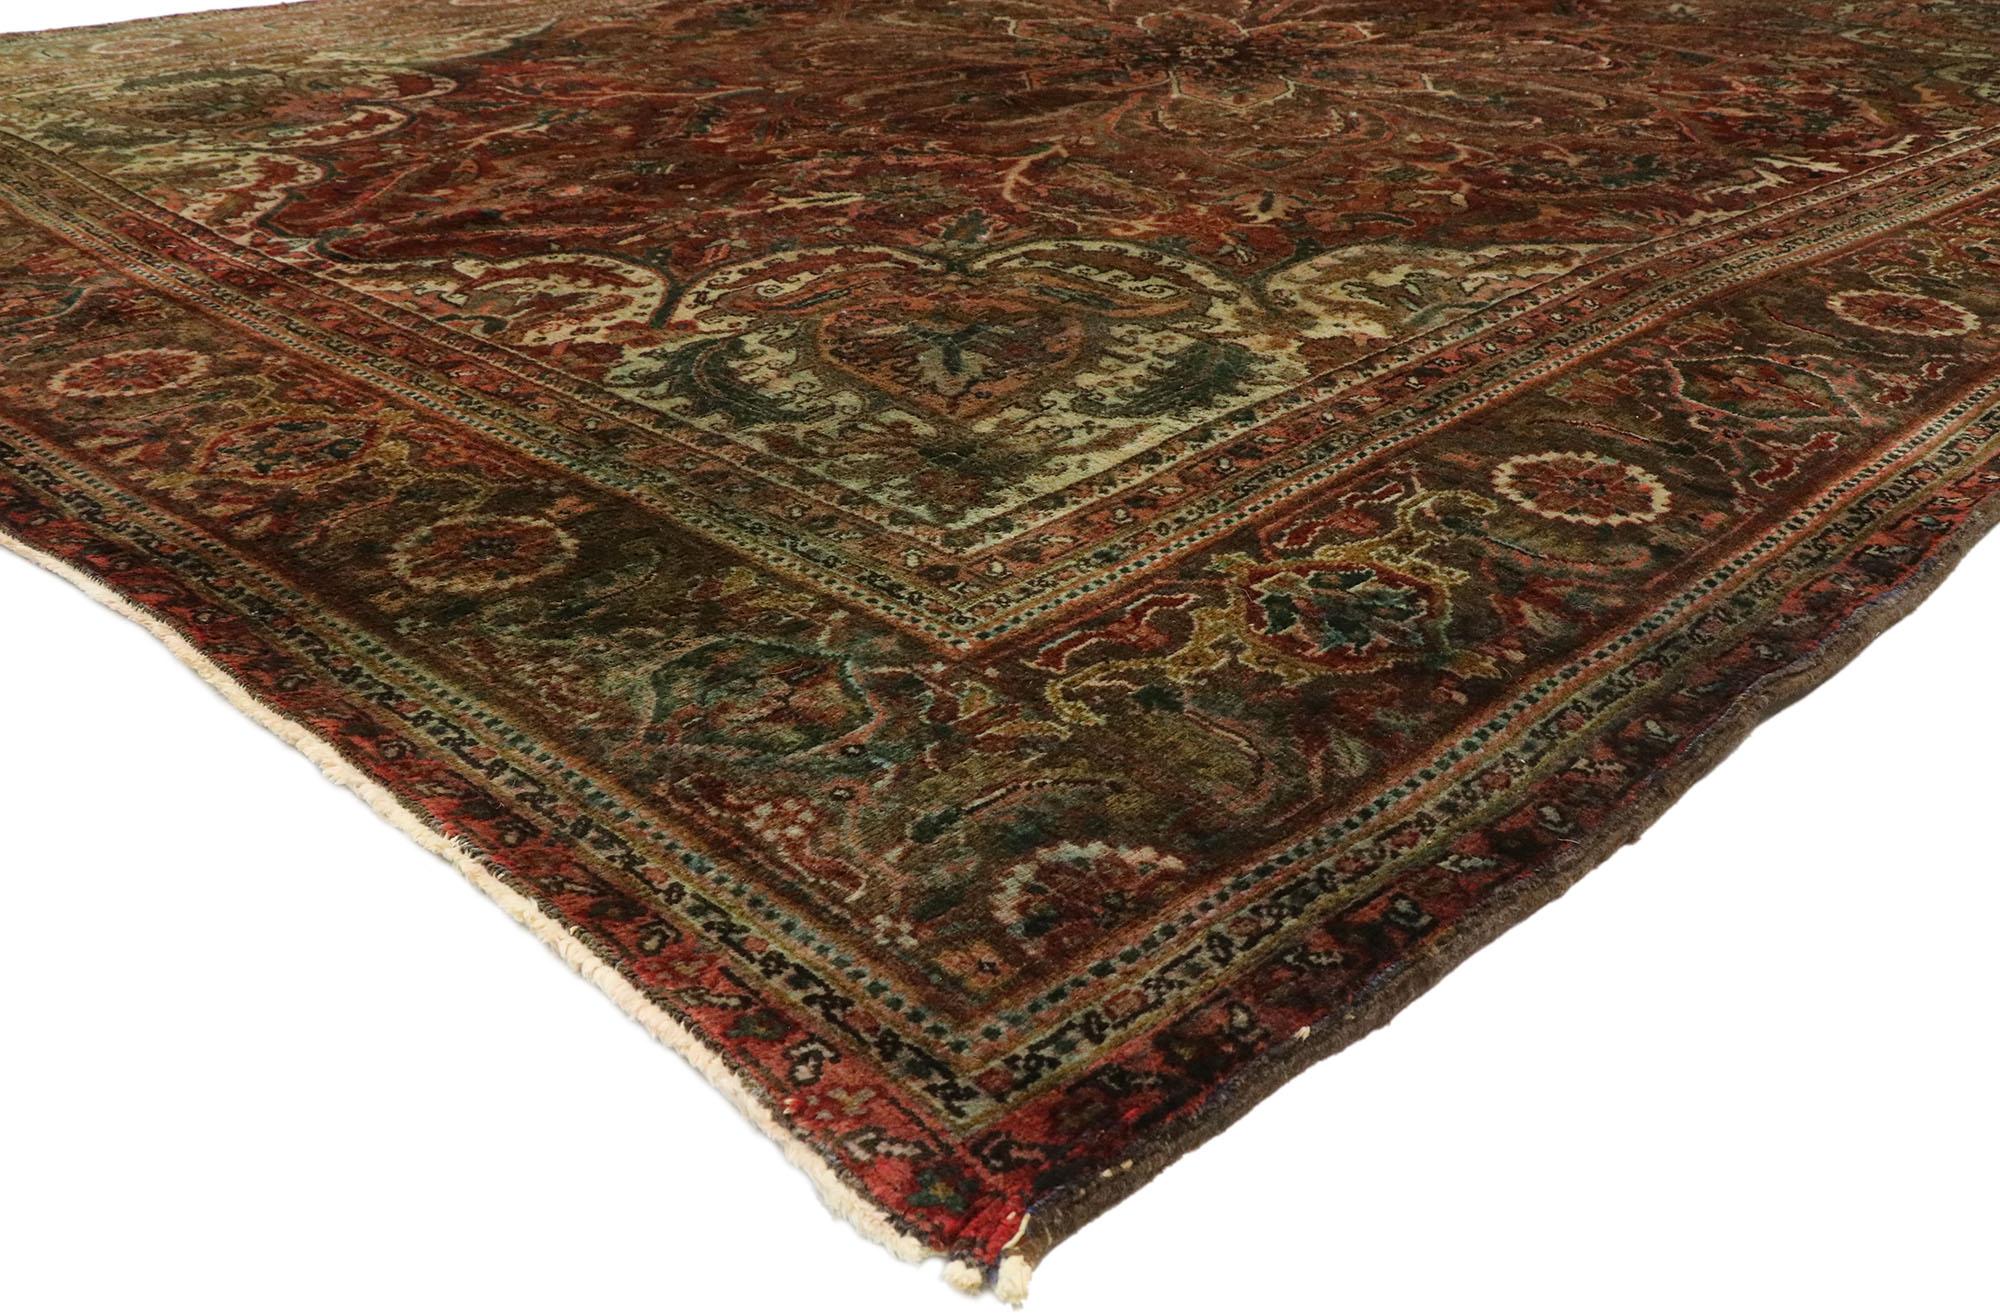 76536, Vintage Persian Ahar Heriz Rug with Modern Rustic Arts & Crafts Style. This hand knotted wool vintage Persian Heriz rug features a cusped octagonal central medallion anchored with trefoil palmette pendants. The field is covered in a densely